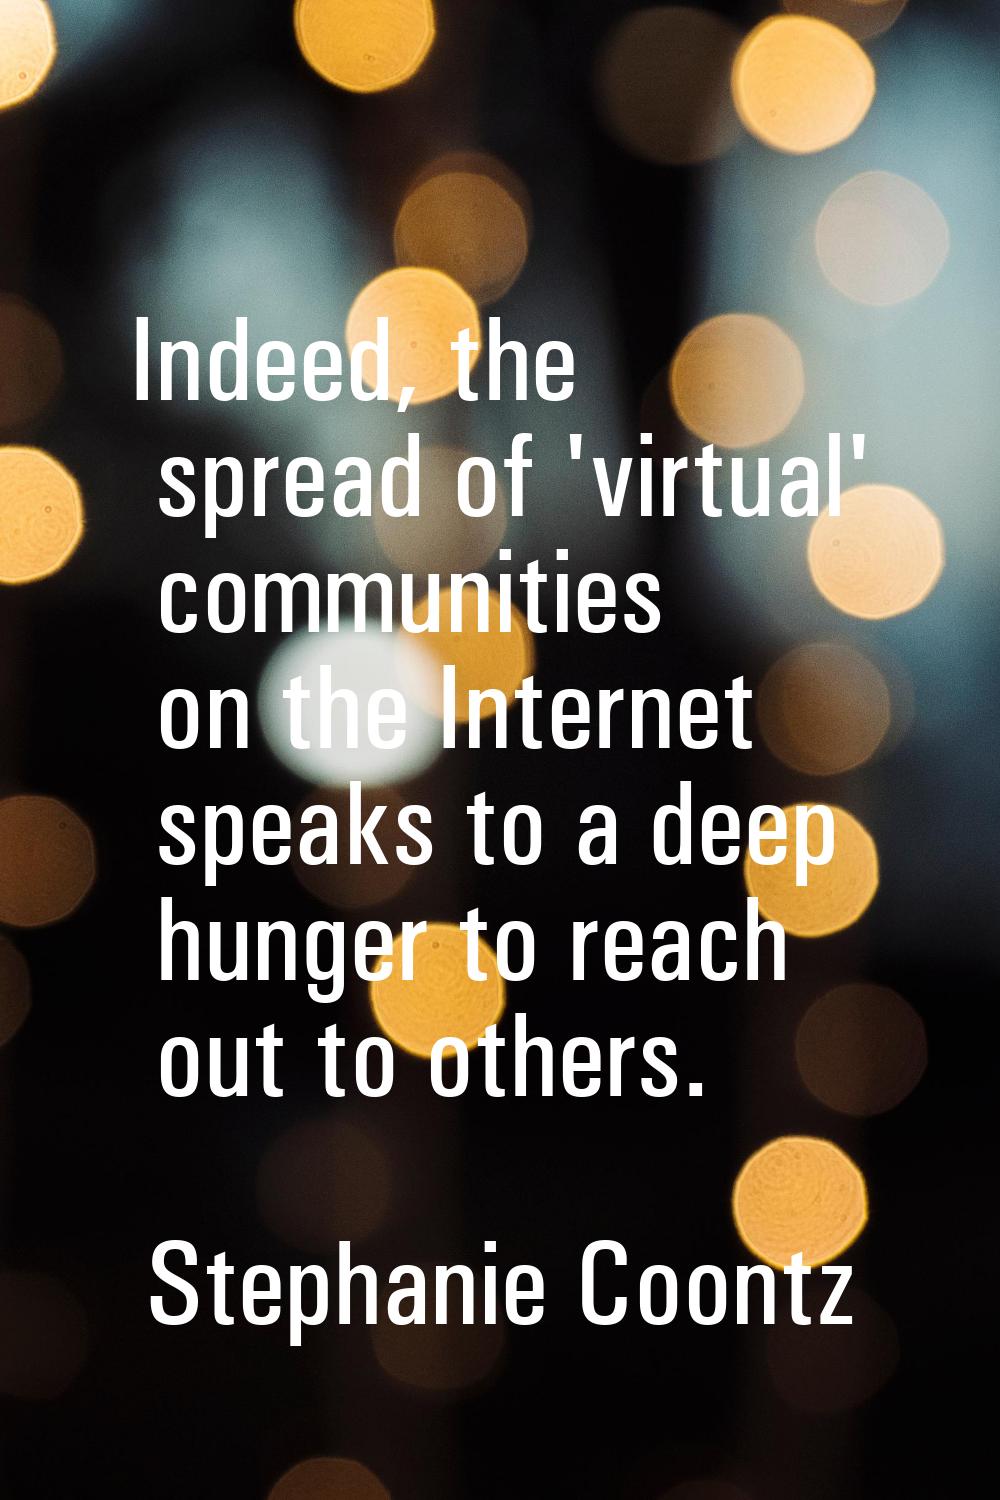 Indeed, the spread of 'virtual' communities on the Internet speaks to a deep hunger to reach out to